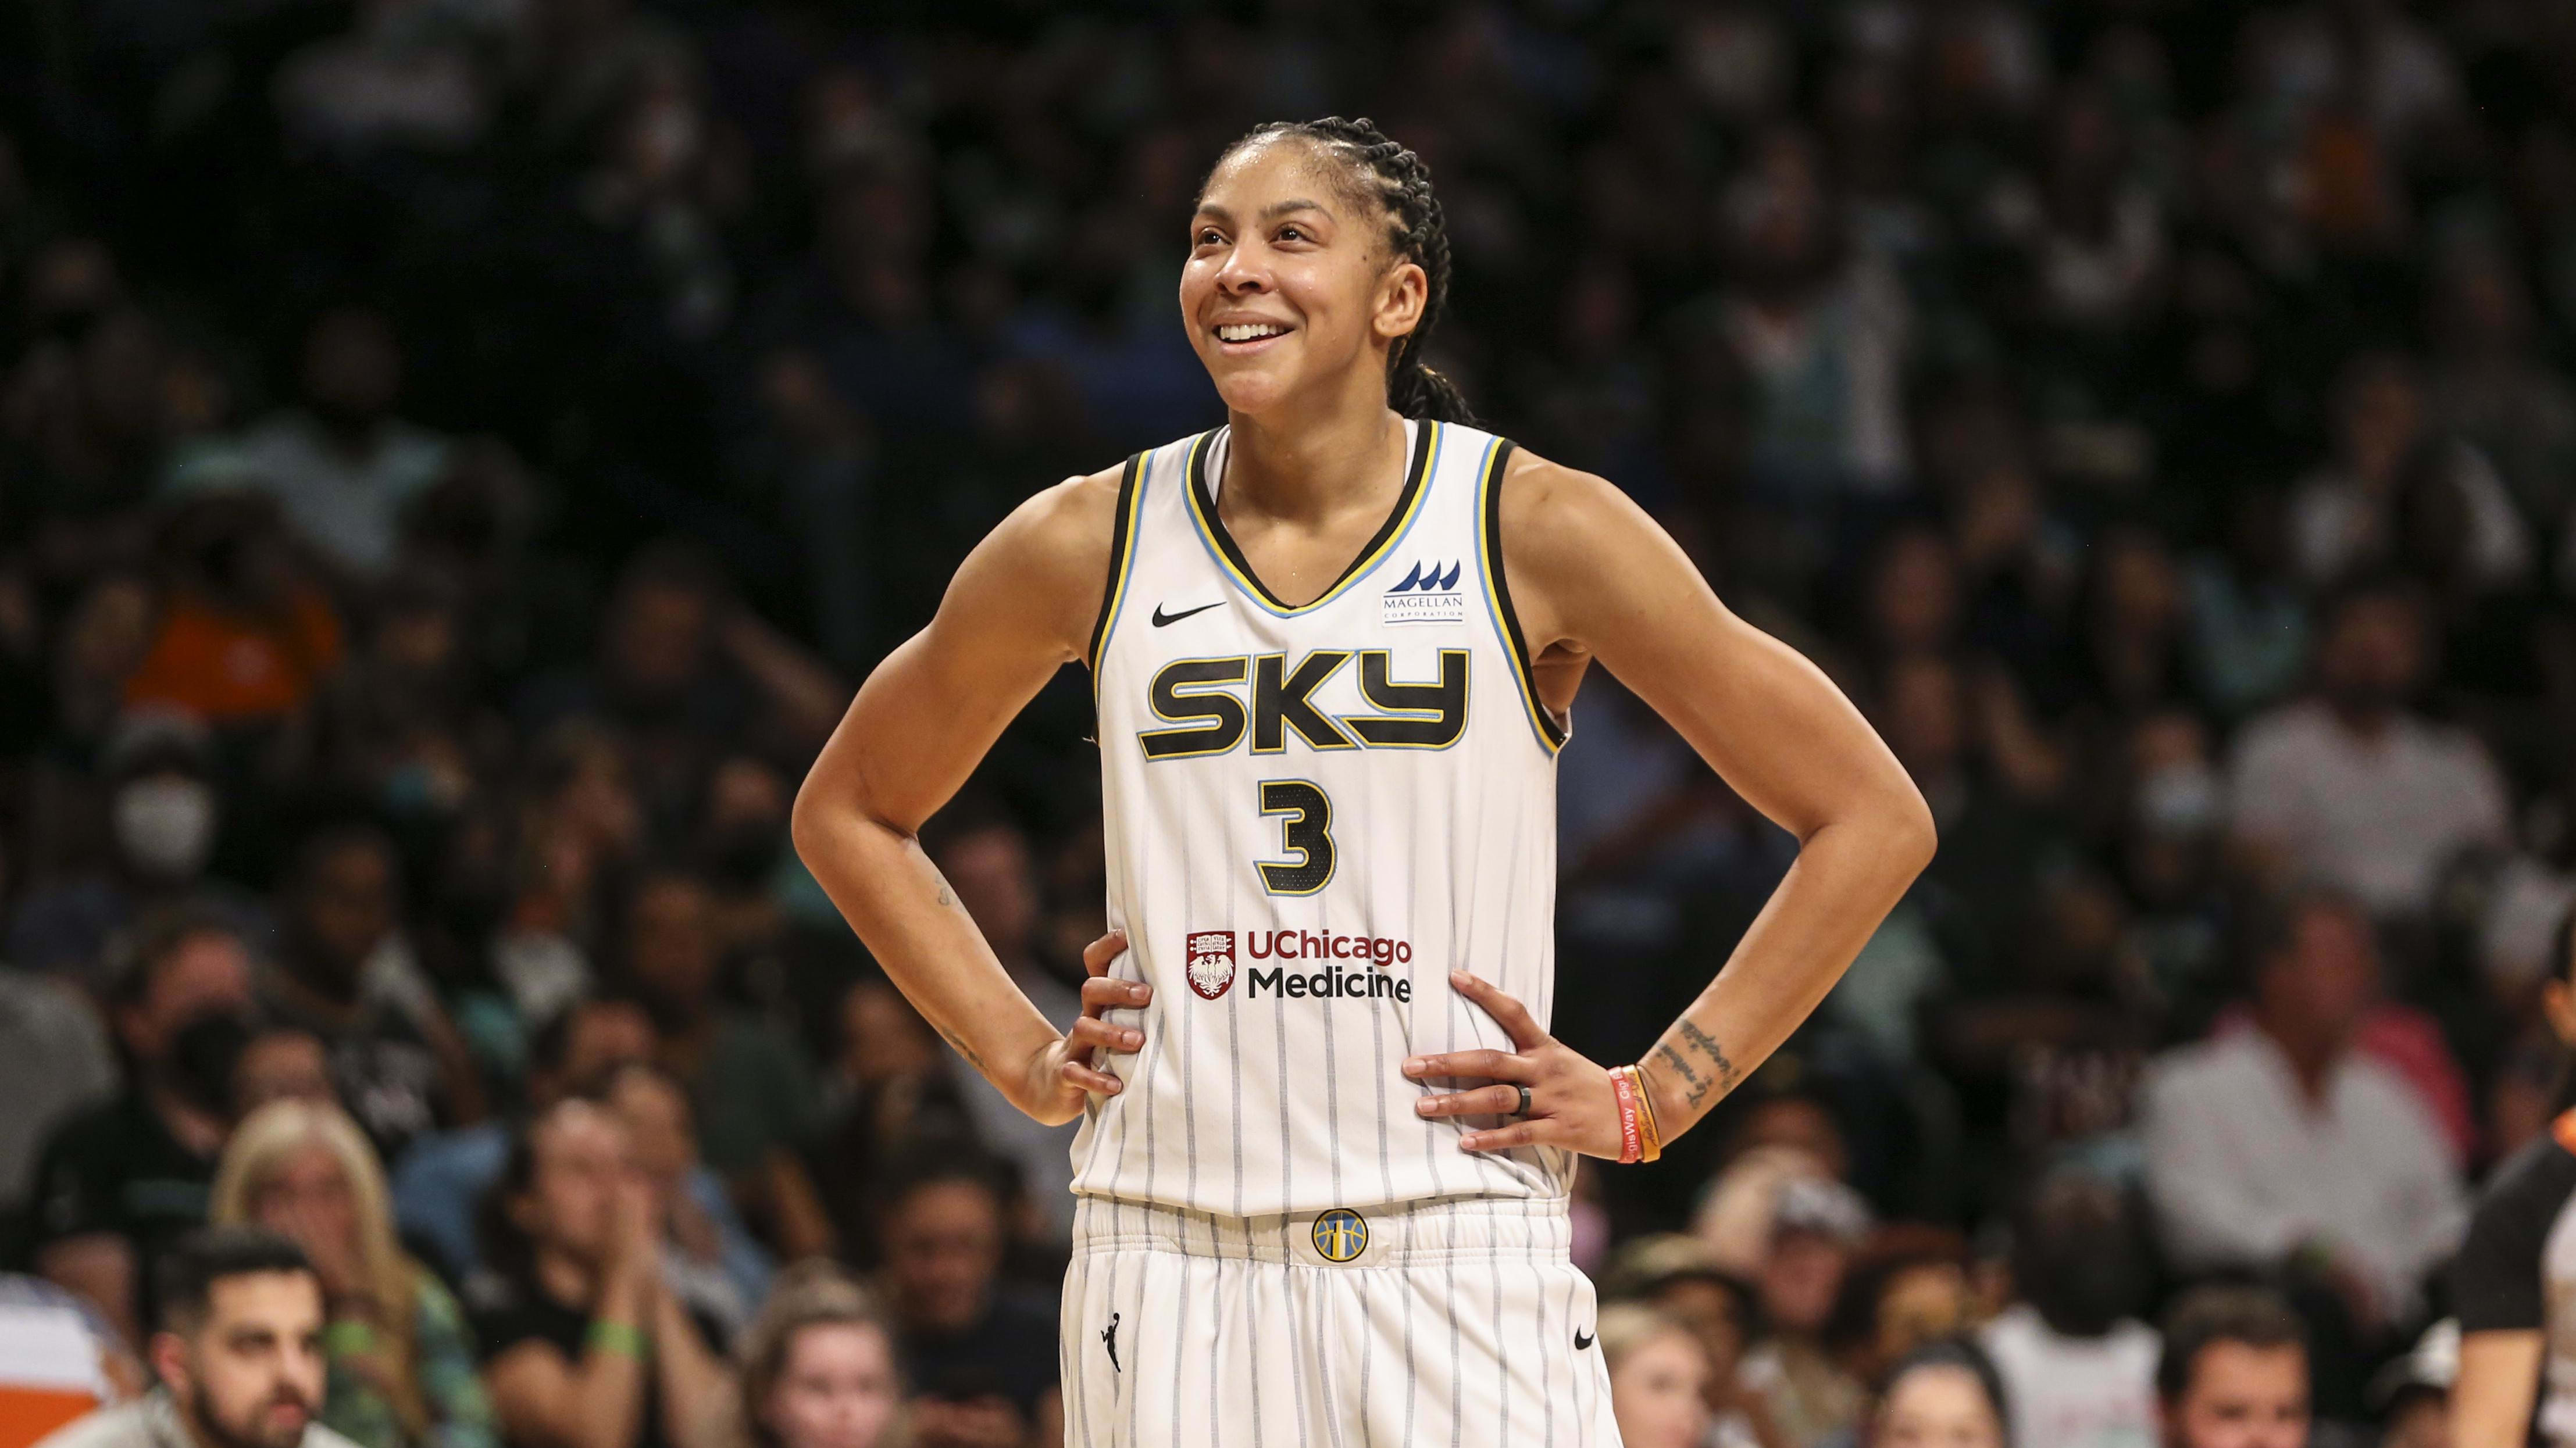 Candace Parker Announces Retirement From WNBA After 16 Seasons